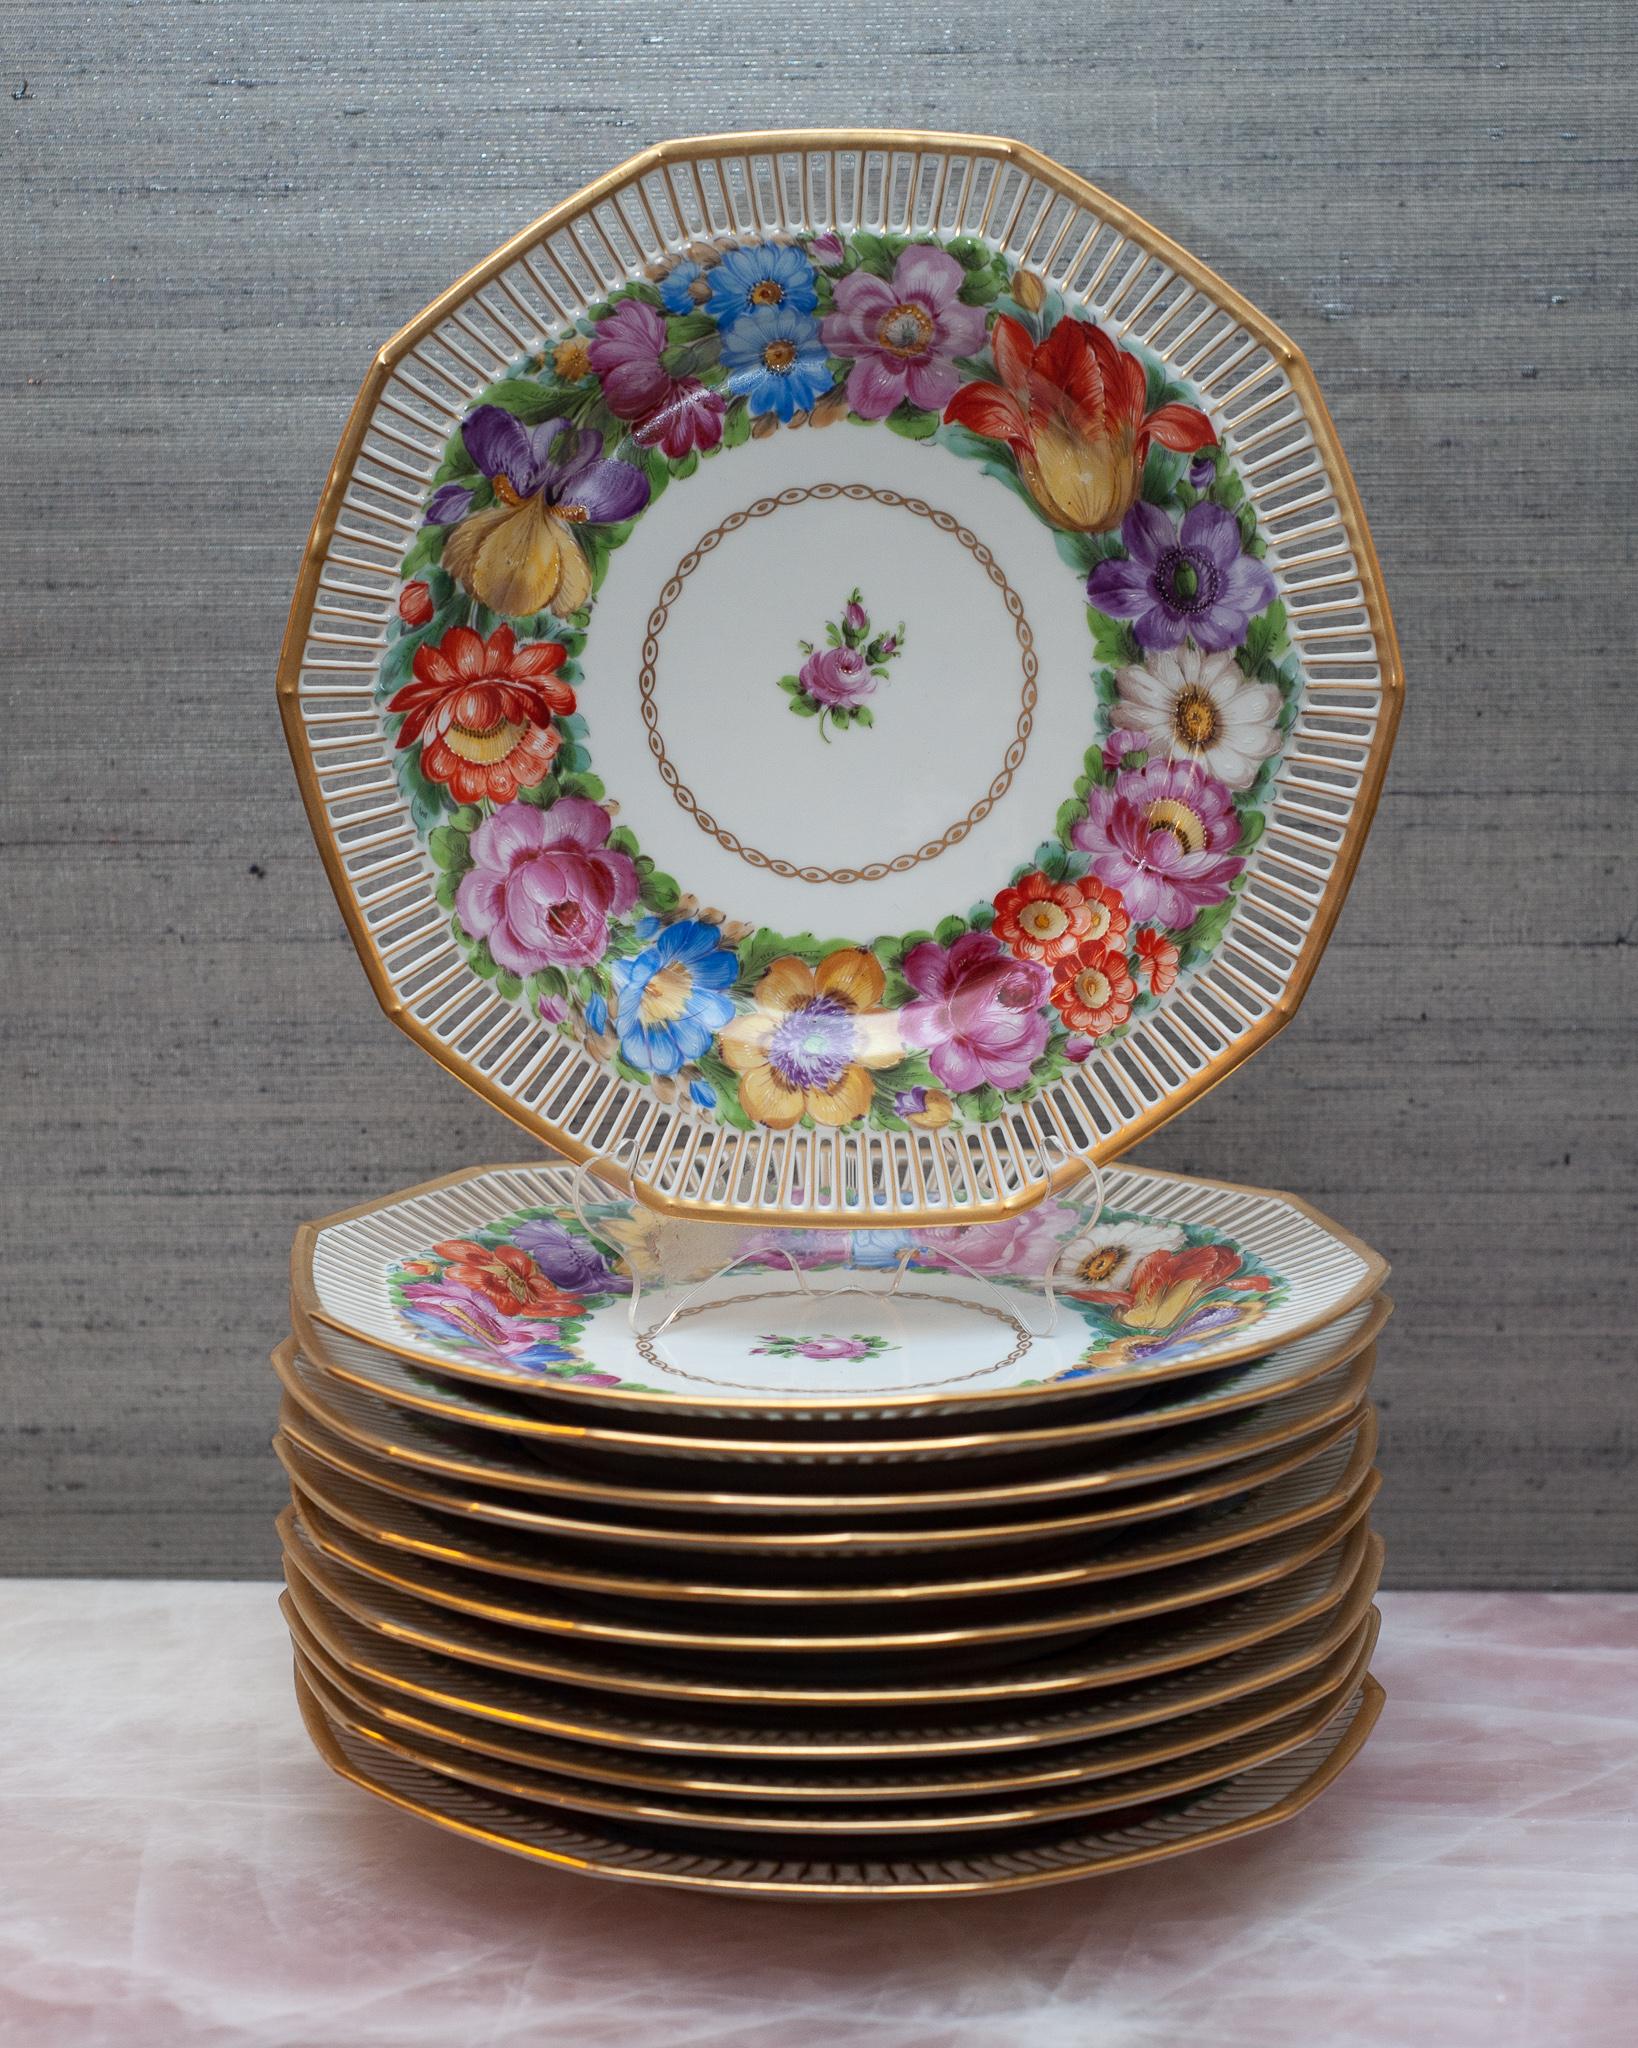 A stunning and ornate set of 12 floral dinner plates by Dresden with gilt detail produced in the early 20th century. What makes these so special is the elaborate cut out gallery edge. Franziska Hirsch started her porcelain painting business in